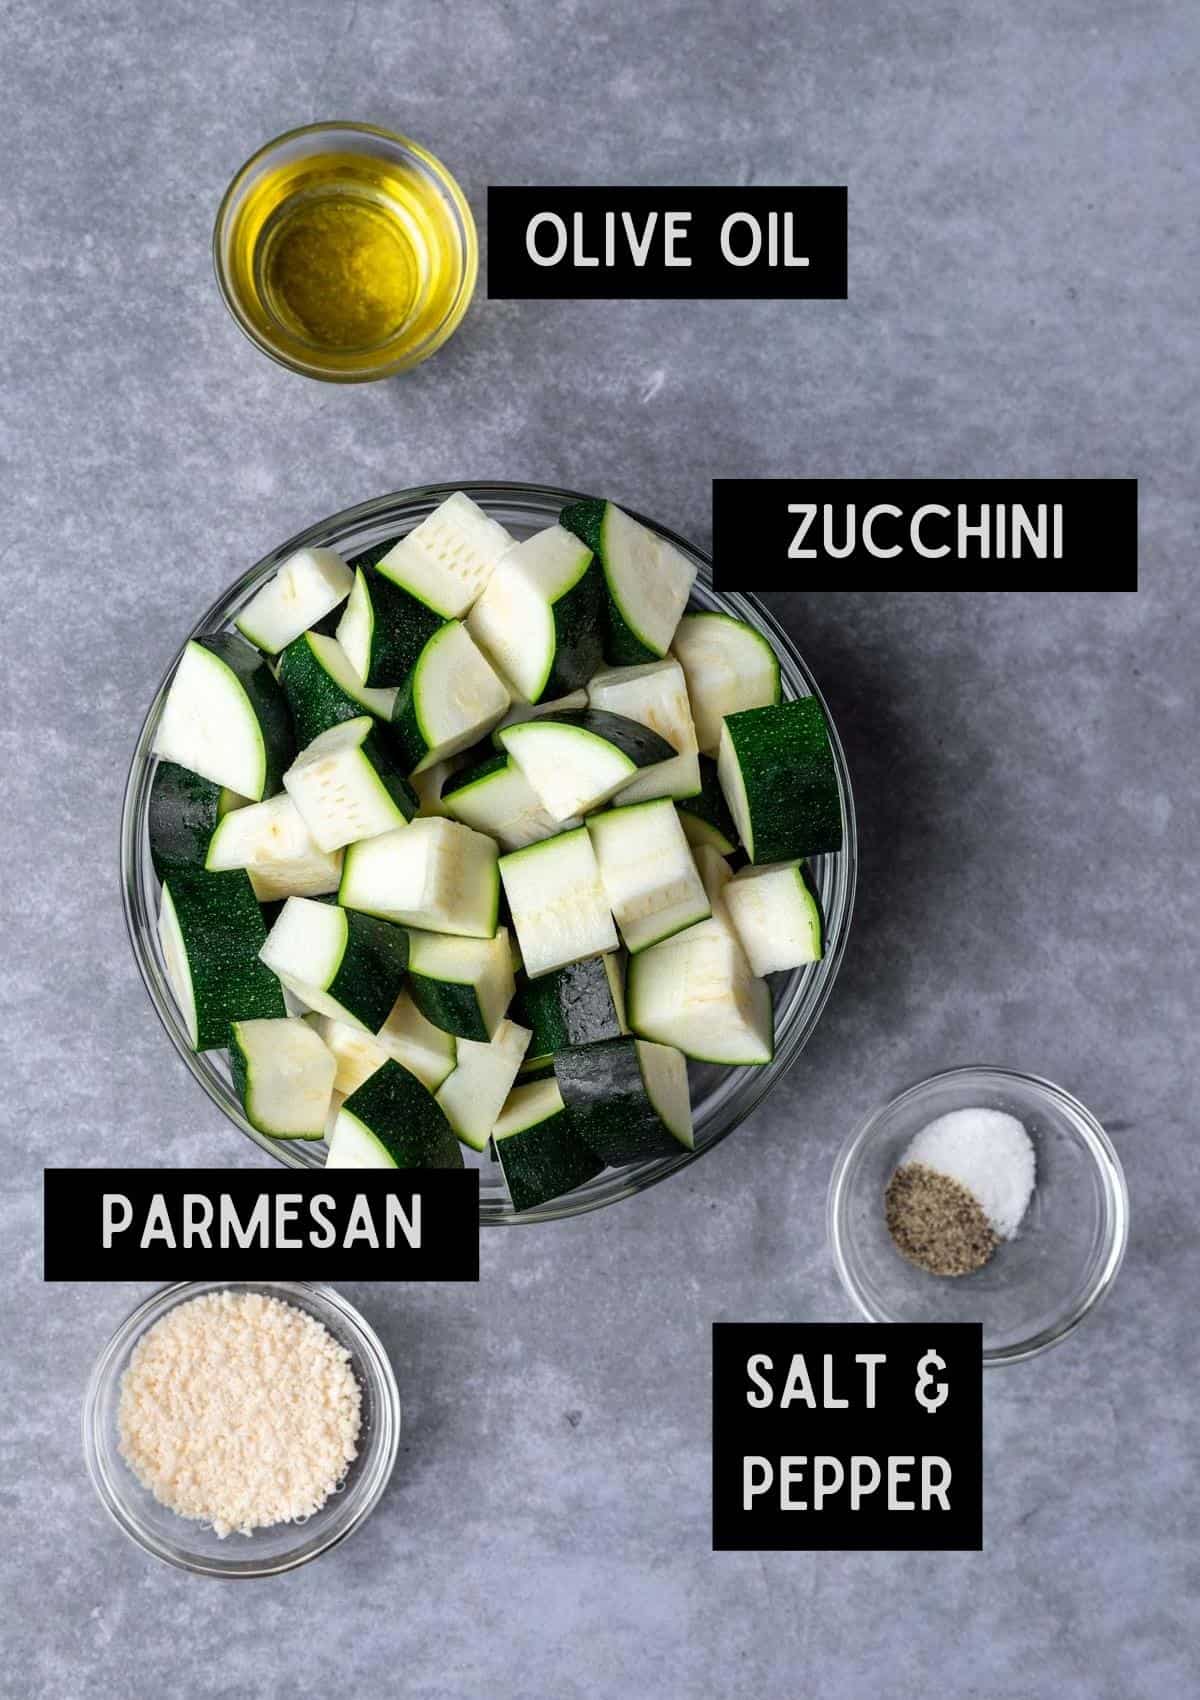 Labelled ingredients for air fryer zucchini (see recipe for details).